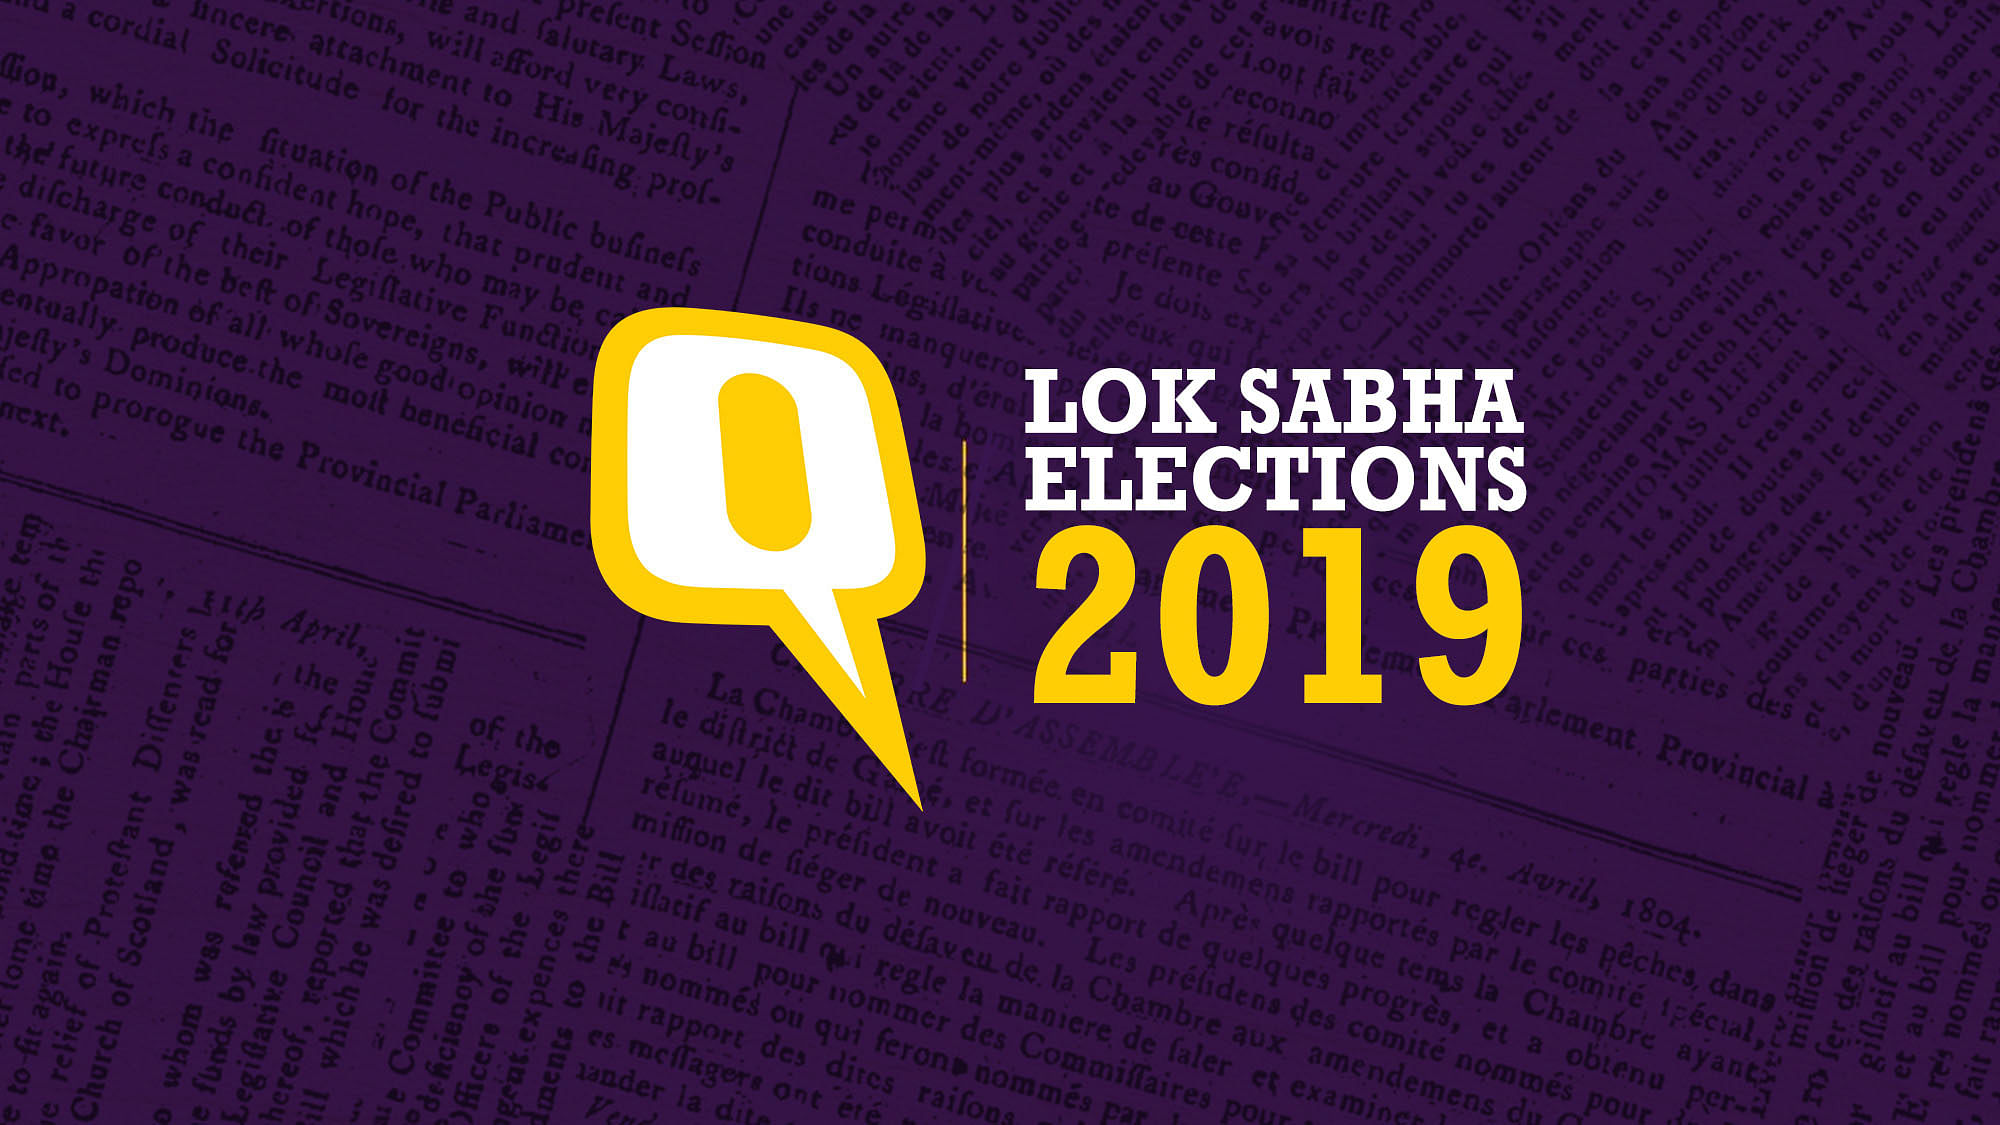 Catch the latest news updates of Lok Sabha elections 2019 here.